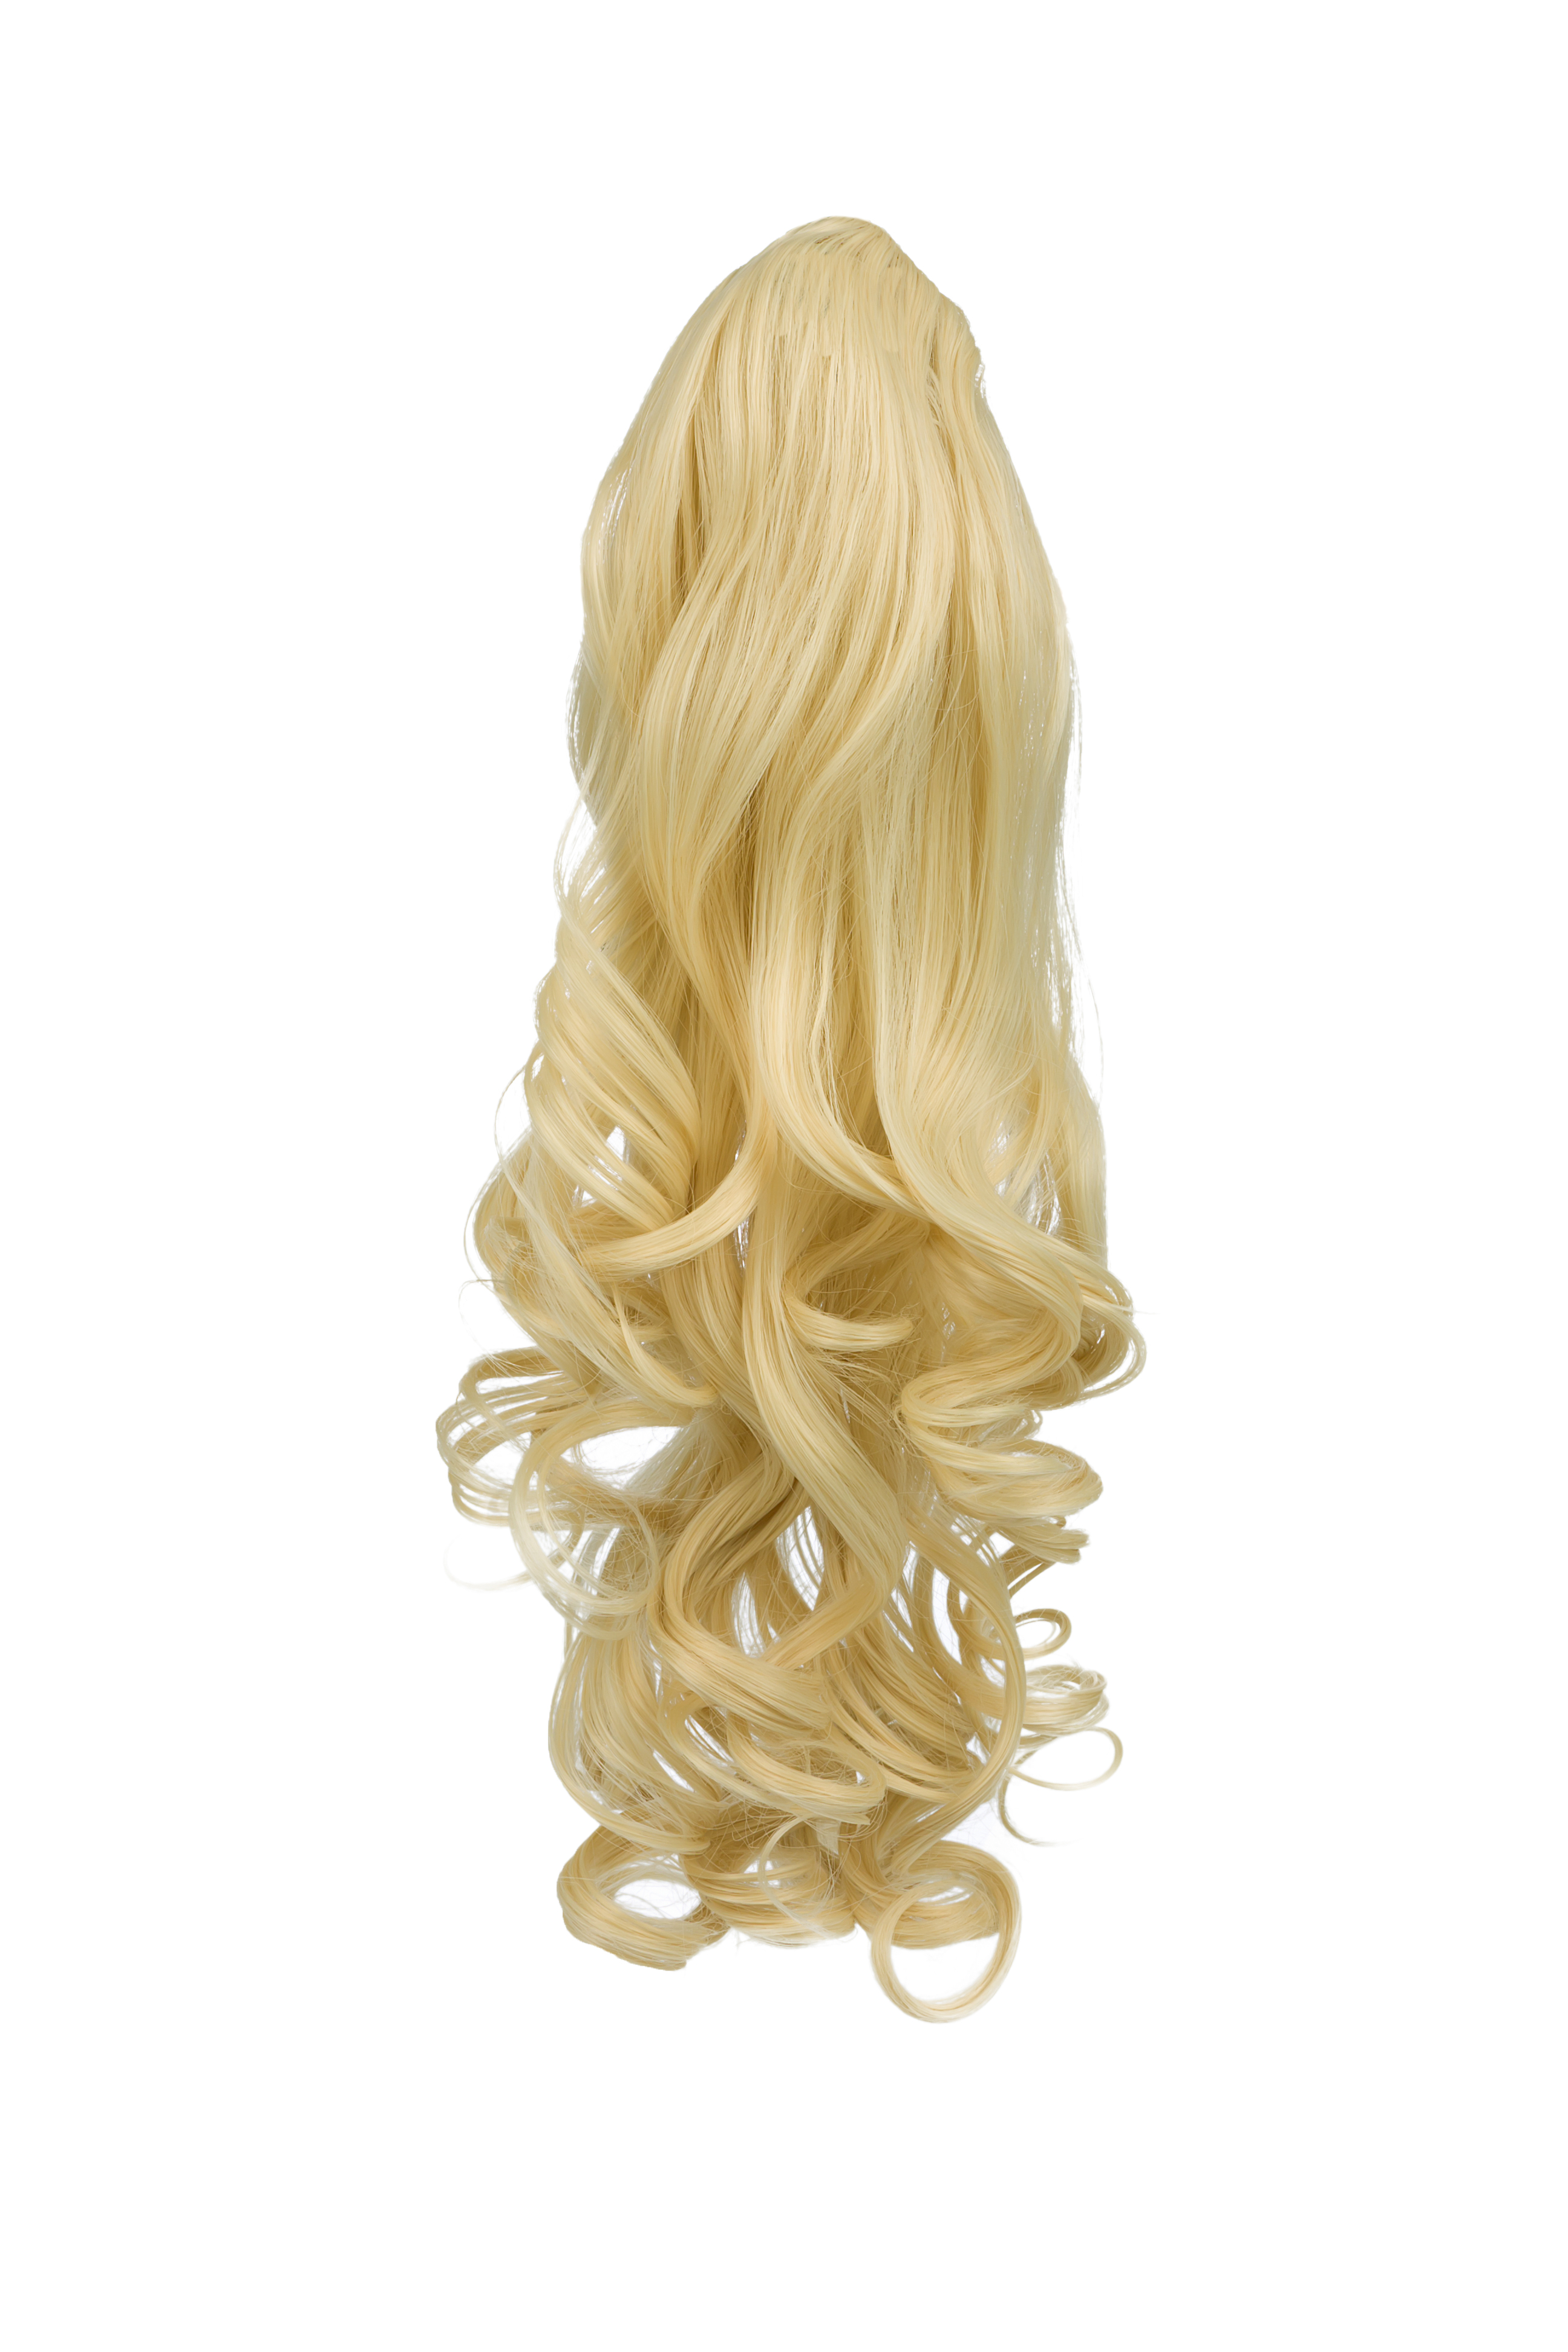 PONYTAIL Clip In Hair Extensions Lightest Blonde #60 REVERSIBLE Claw ...